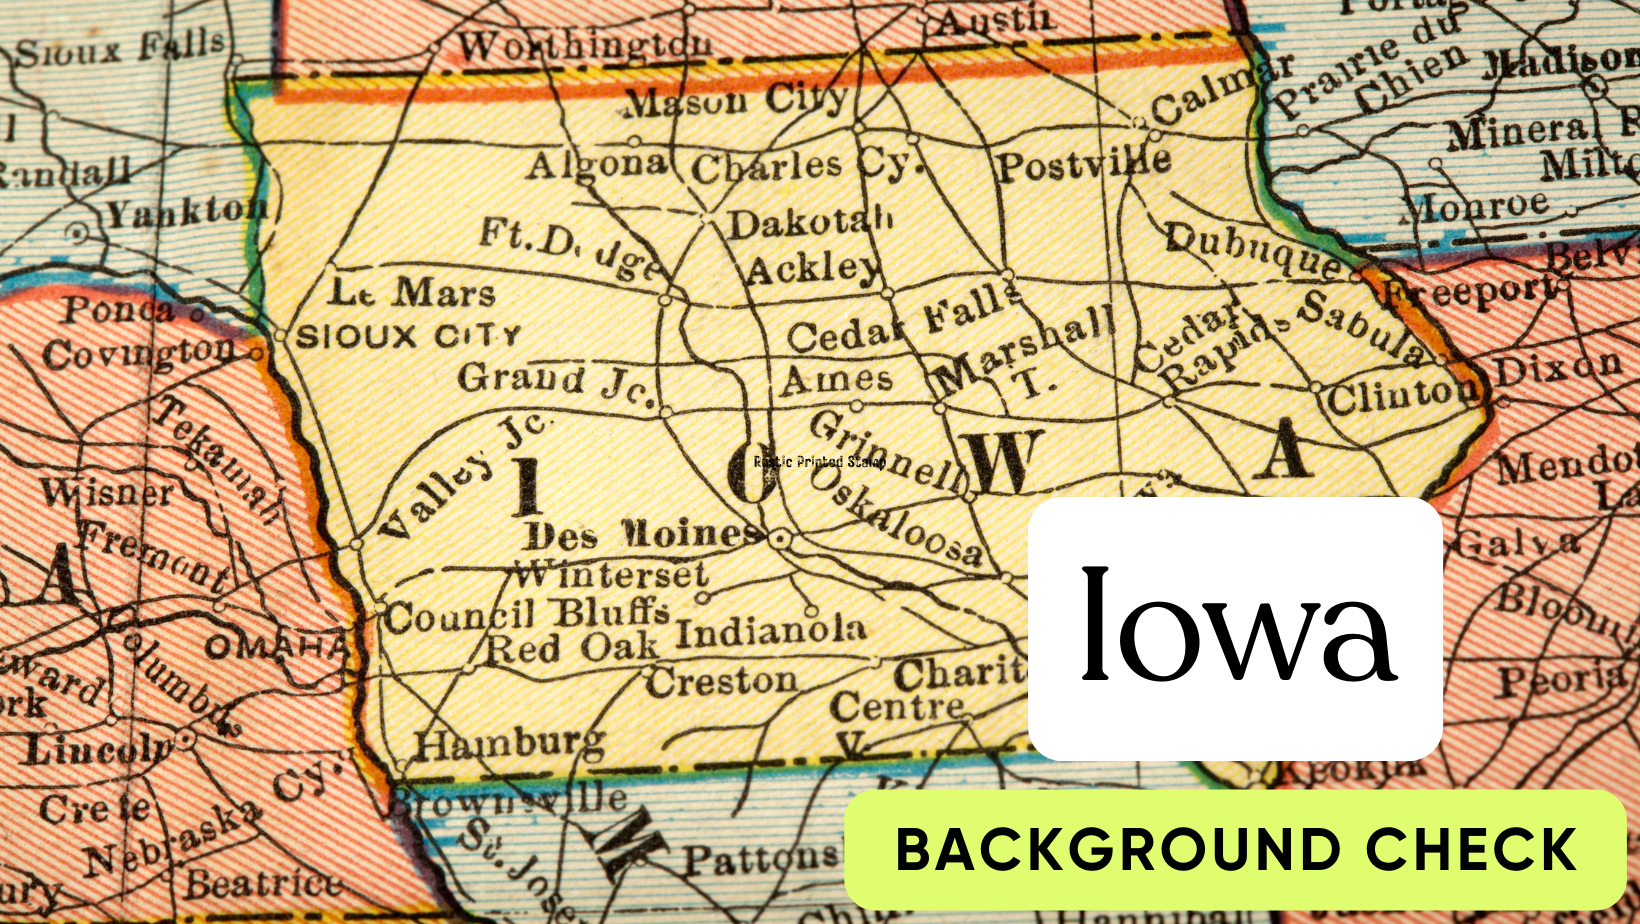 Iowa Background Check – Find the Best IA BG Check Sites